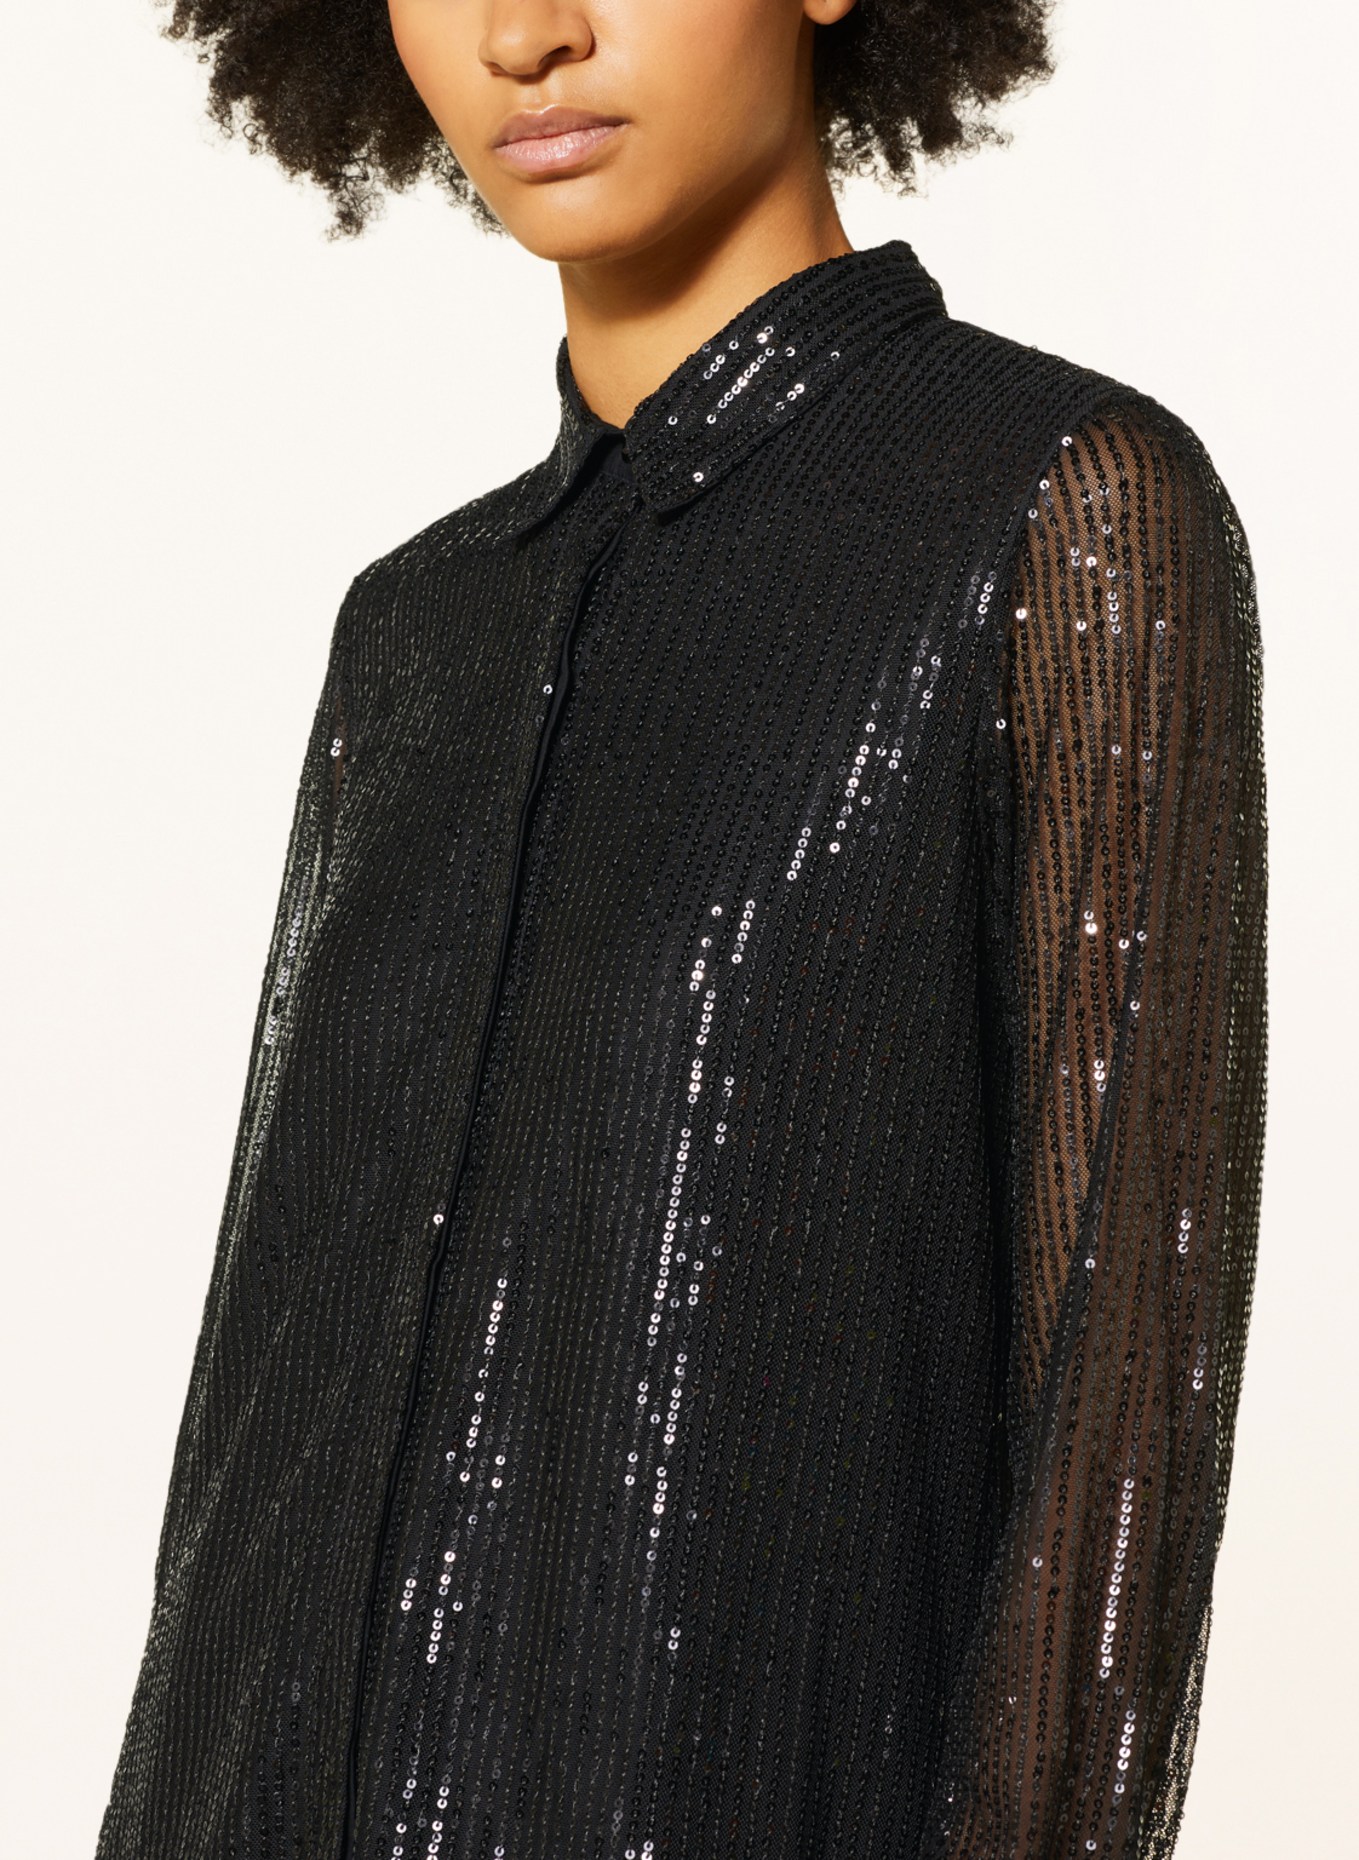 Princess GOES HOLLYWOOD Shirt blouse made of mesh with sequins, Color: BLACK (Image 4)